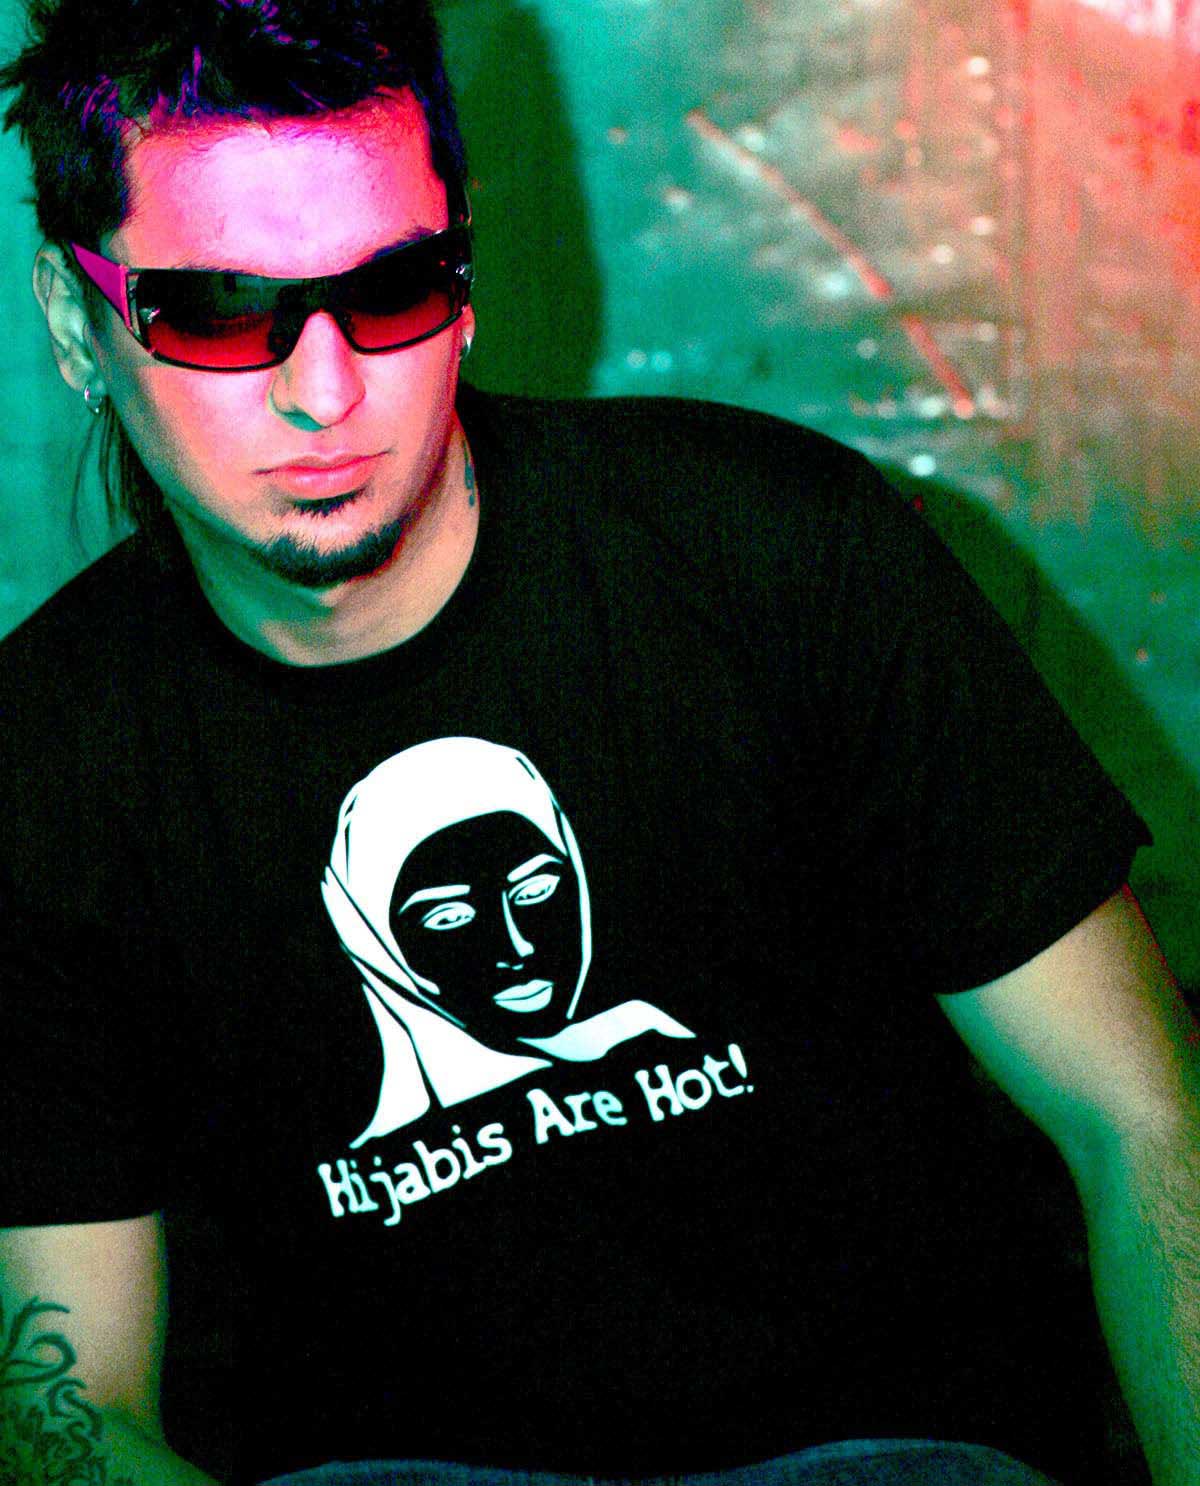 South Asian Male model wearing Black American Apparel tshirt with white graphic design image on front that says Hijabis Are Hot!